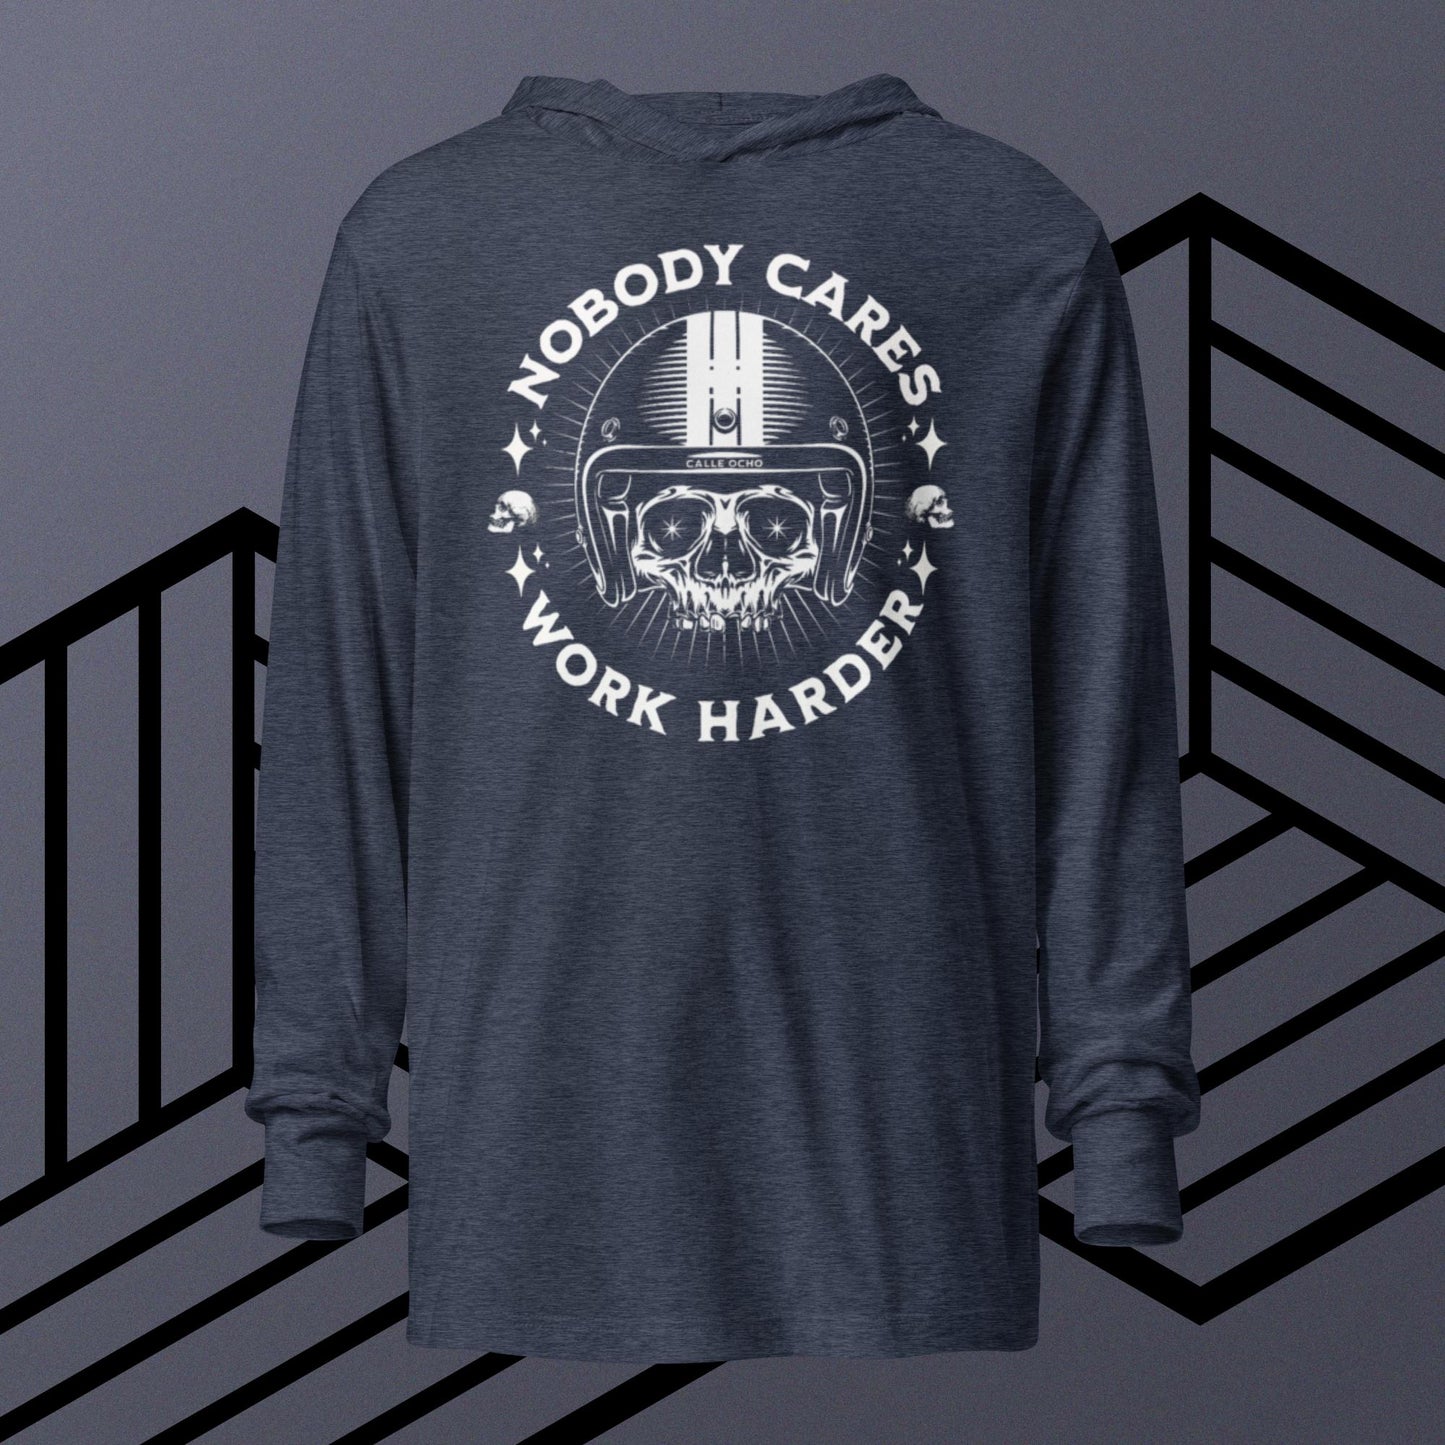 Nobody cares work harder hooded T